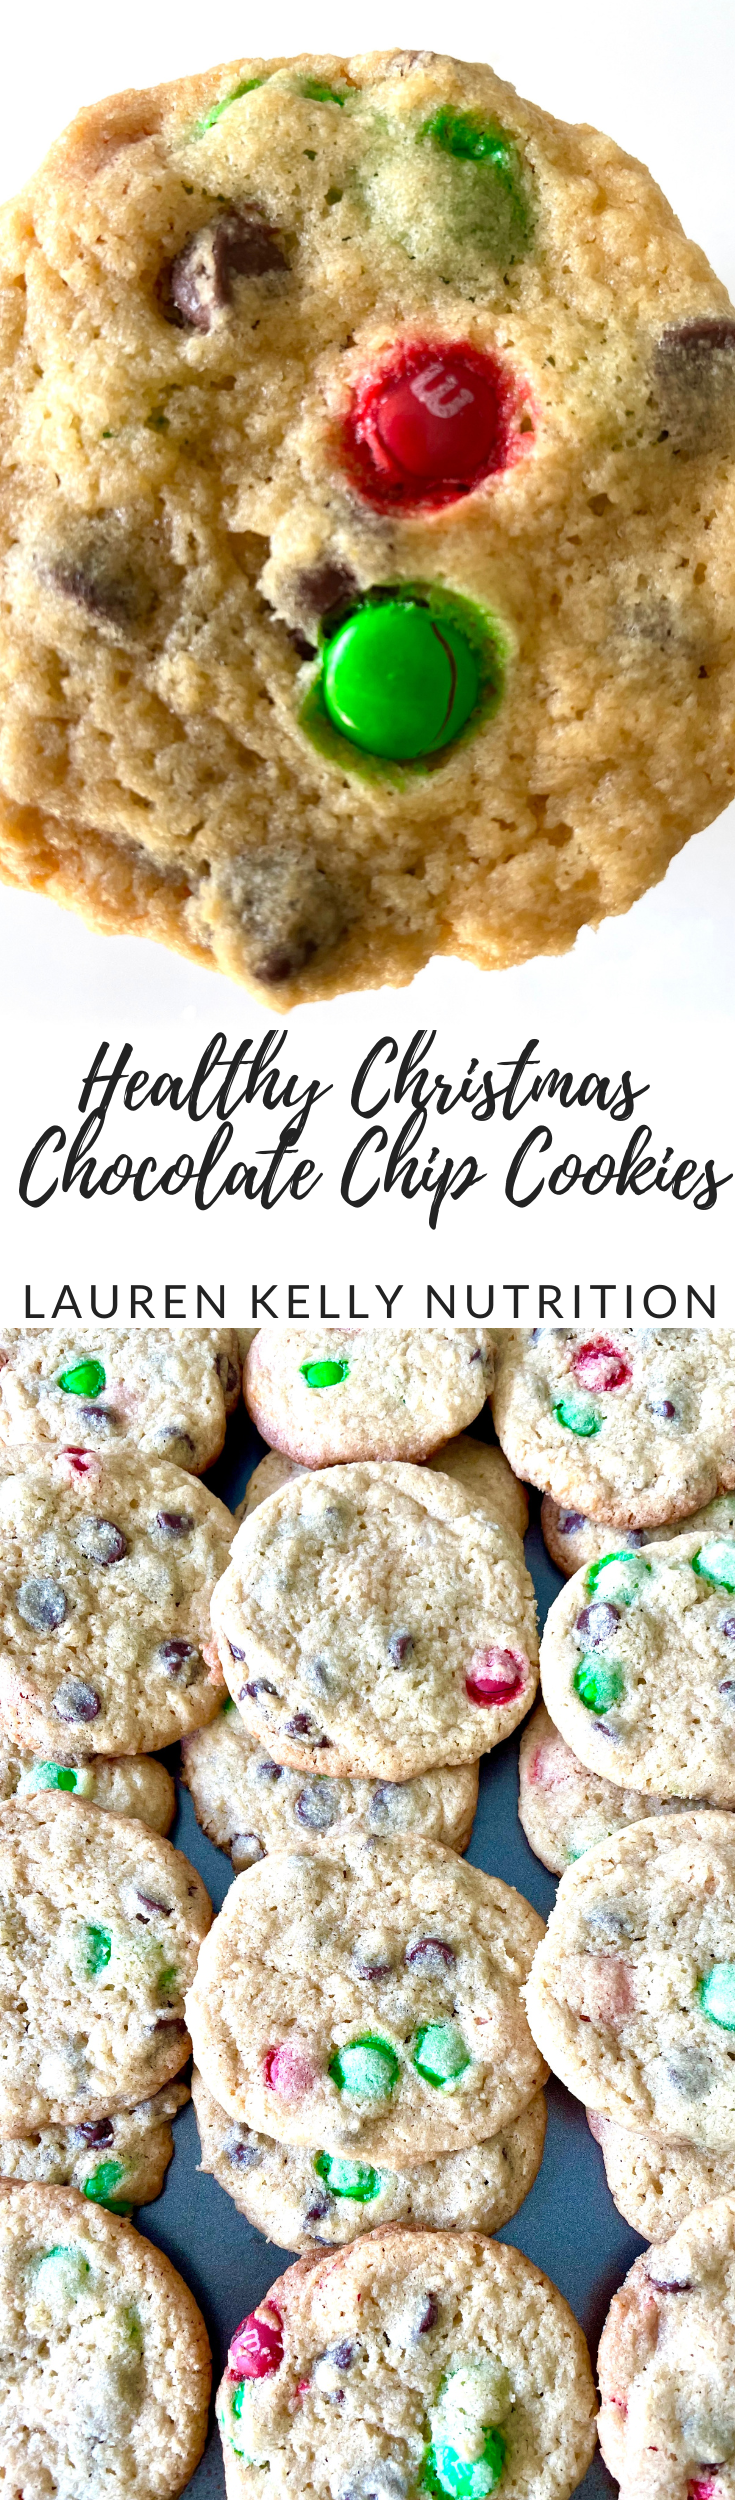 These easy to make Christmas Chocolate Chip Cookies are lightened up and delicious!